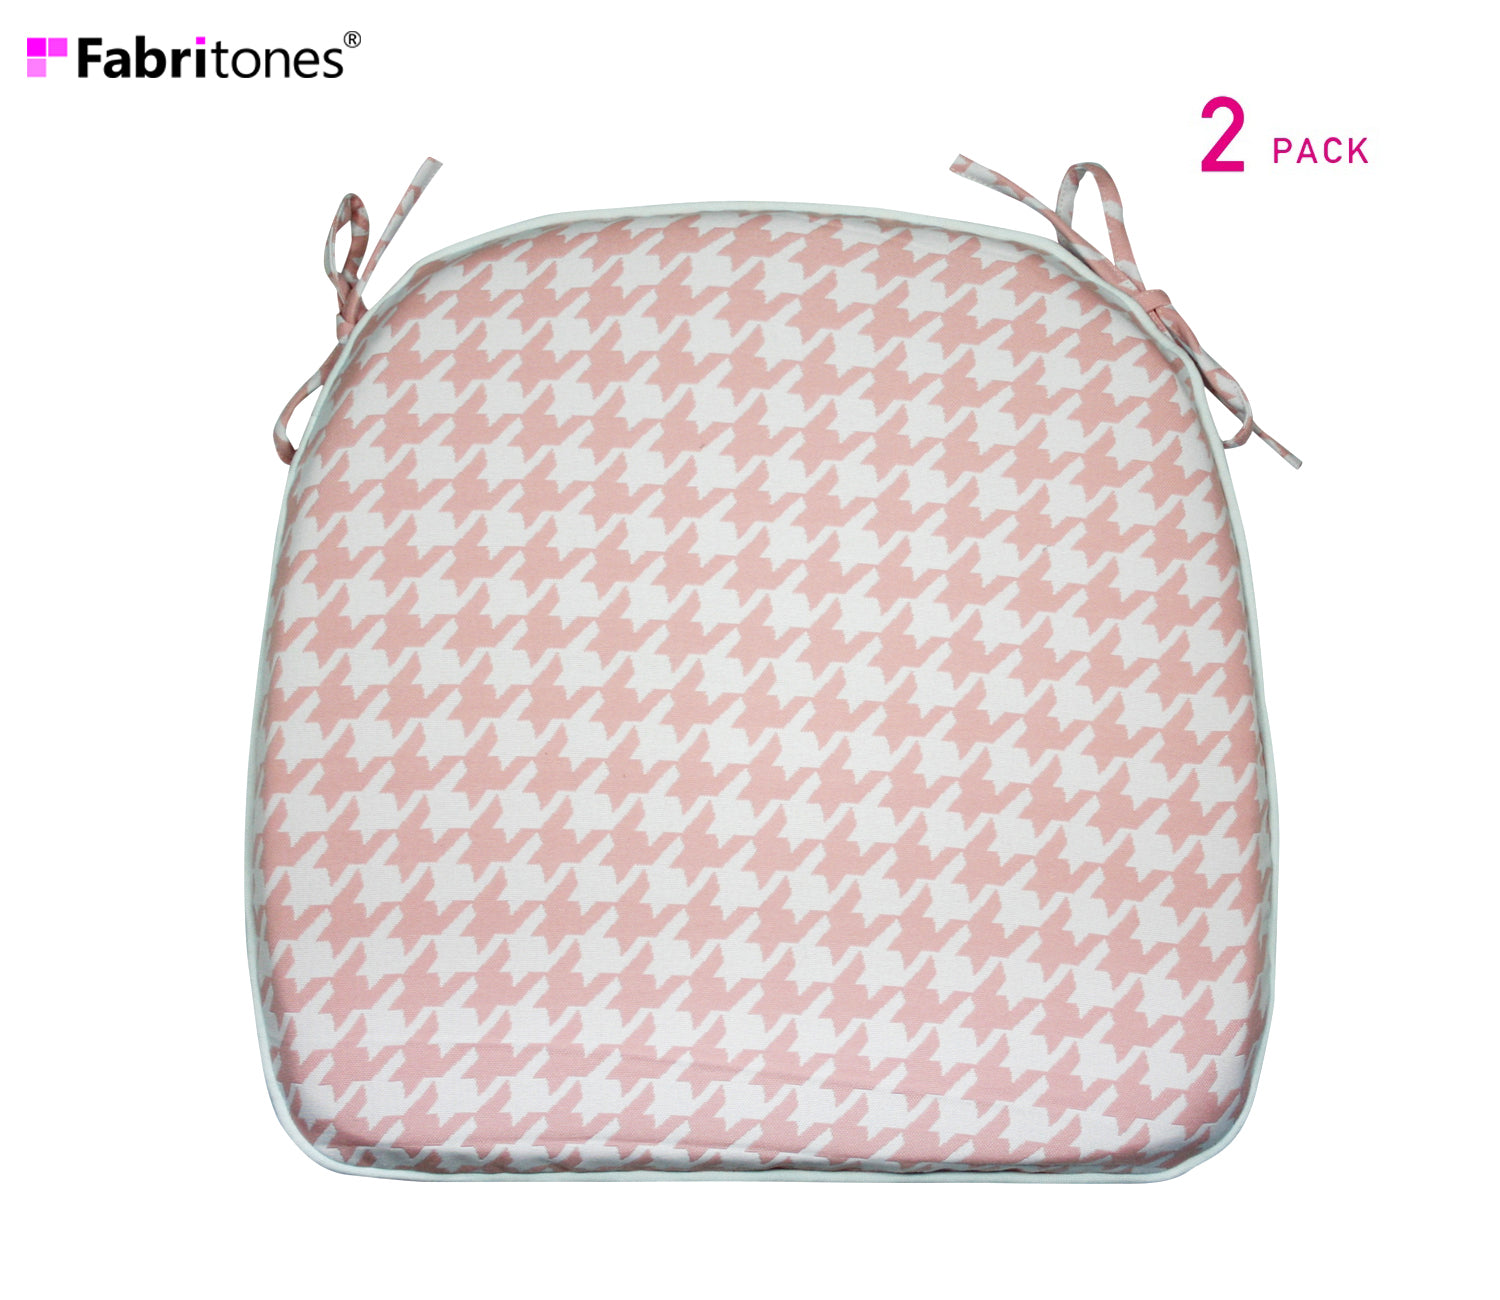 Outdoor Chair Pads Set of 2 Pink Houndstooth Square Patio Chair Cushions with Ties